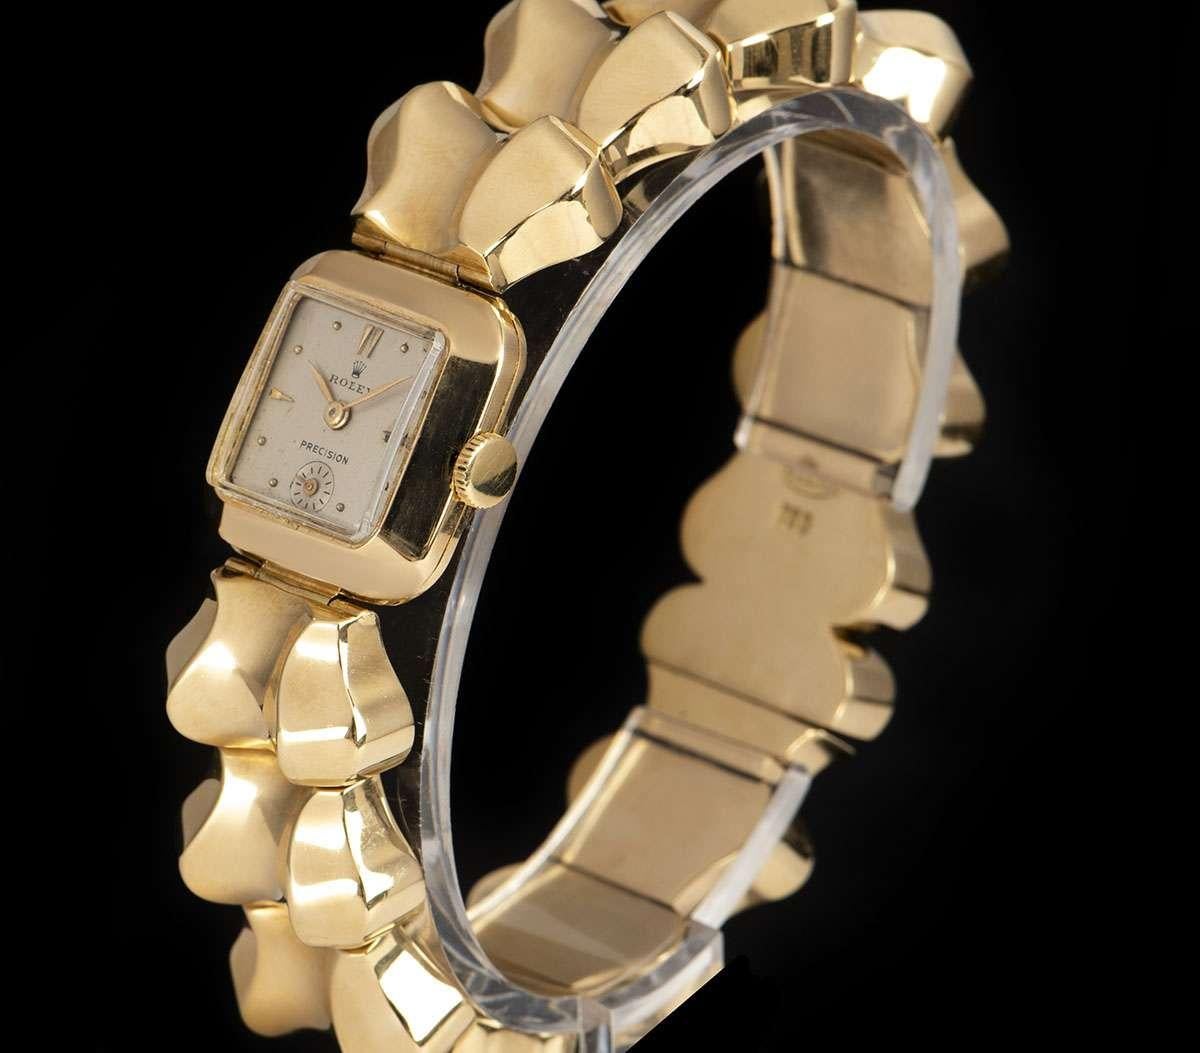 A Yellow Gold Precision Vintage Ladies Wristwatch, silver dial with applied hour markers, small seconds at 6 0'clock, a fixed yellow gold bezel, a yellow gold bracelet with a yellow gold jewellery style clasp, plastic glass, manual wind movement, in